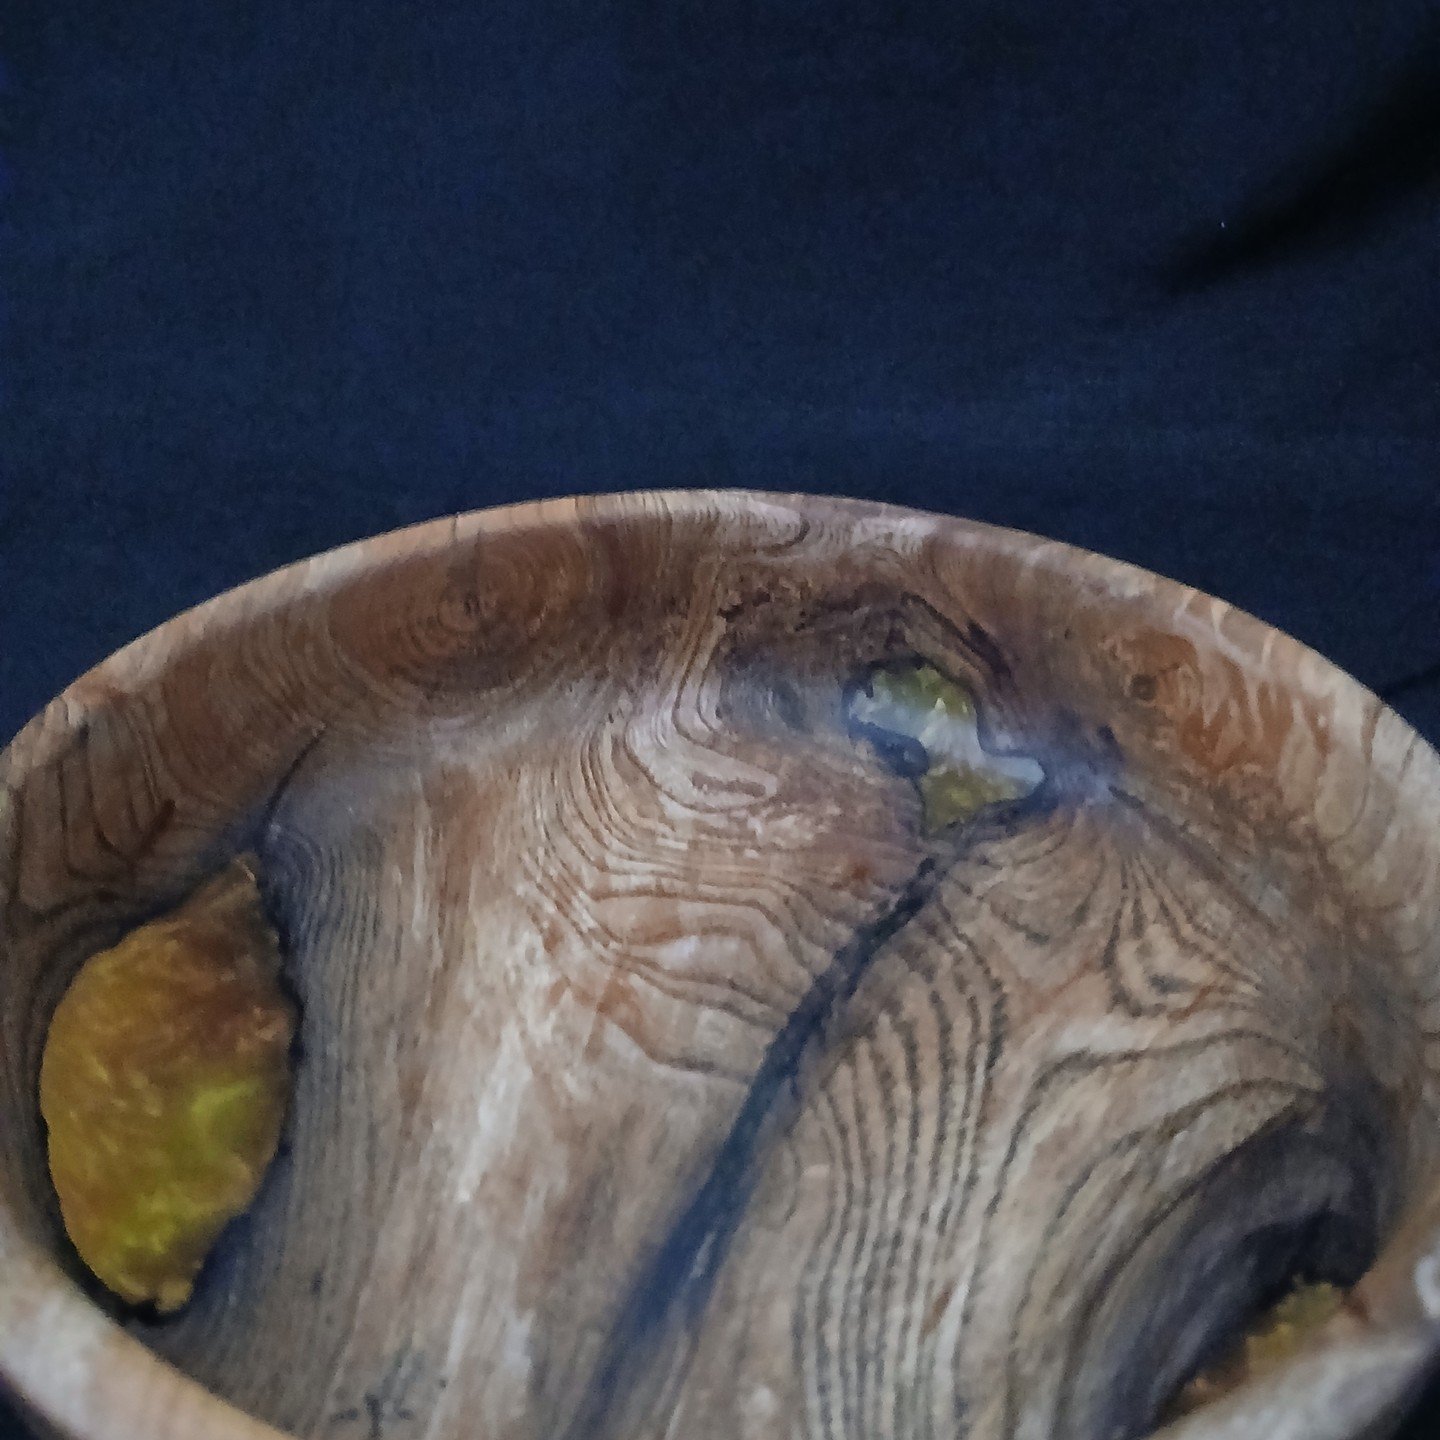 Dragons Eye

Rustic like a dragon should be. The woods a bit all over the place - but it's a cool looking piece that's going to make someone happy. 
I've put it on the website. Link below.

https://www.heartbygordon.net/shop/p/4ipb9u9e5pacoa724mqz7yi